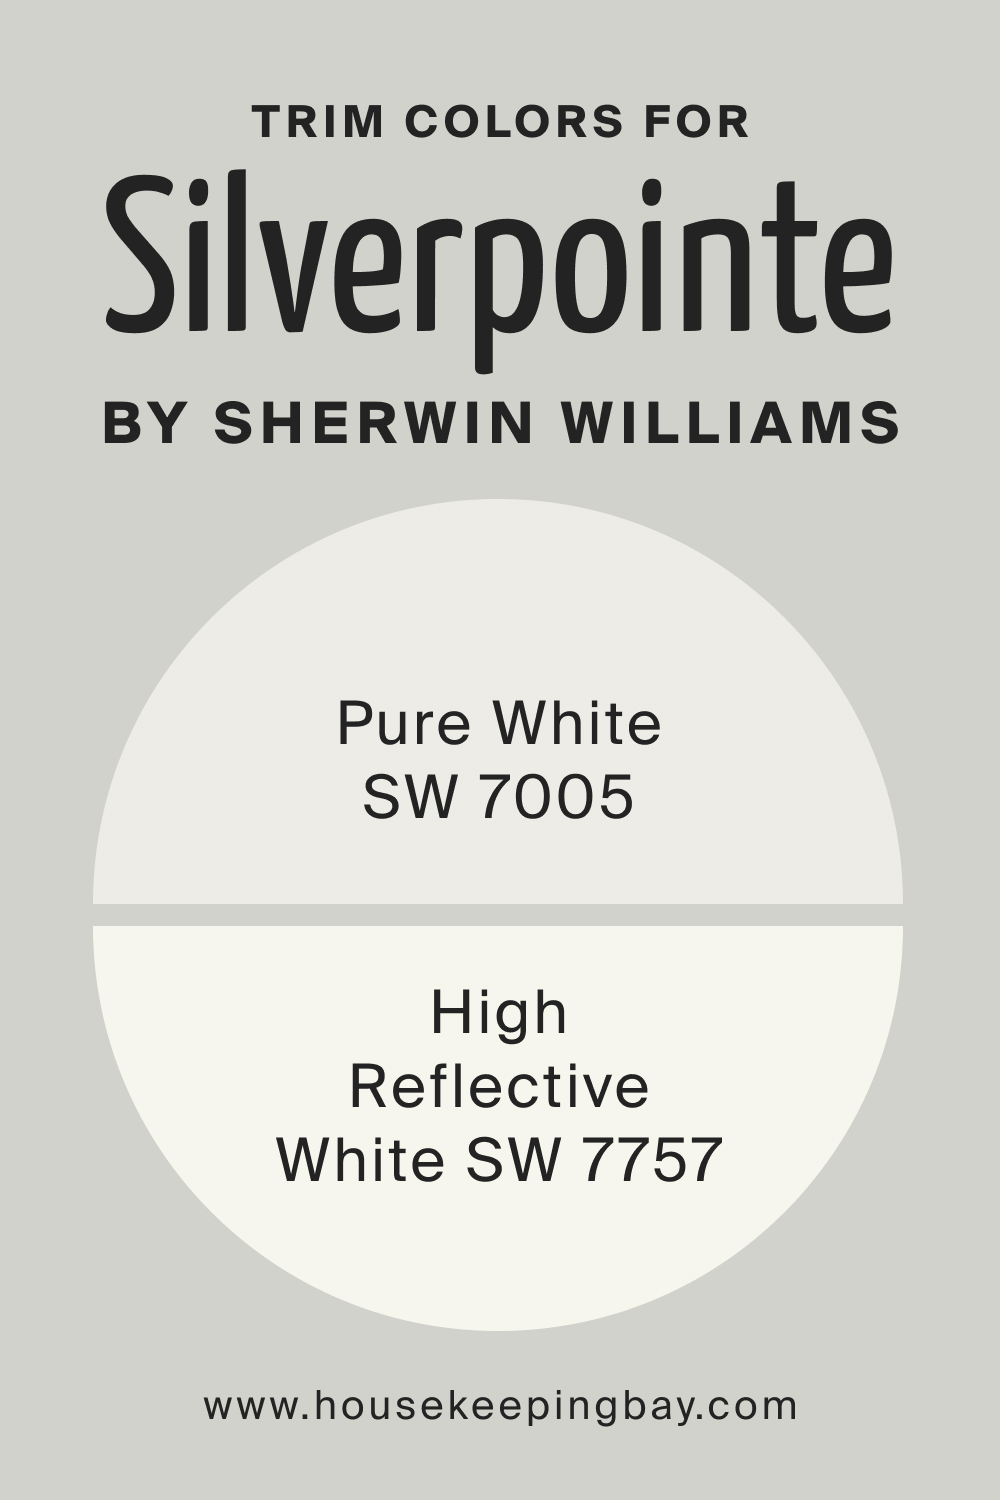 Trim Color for SW Silverpointe by Sherwin Williams